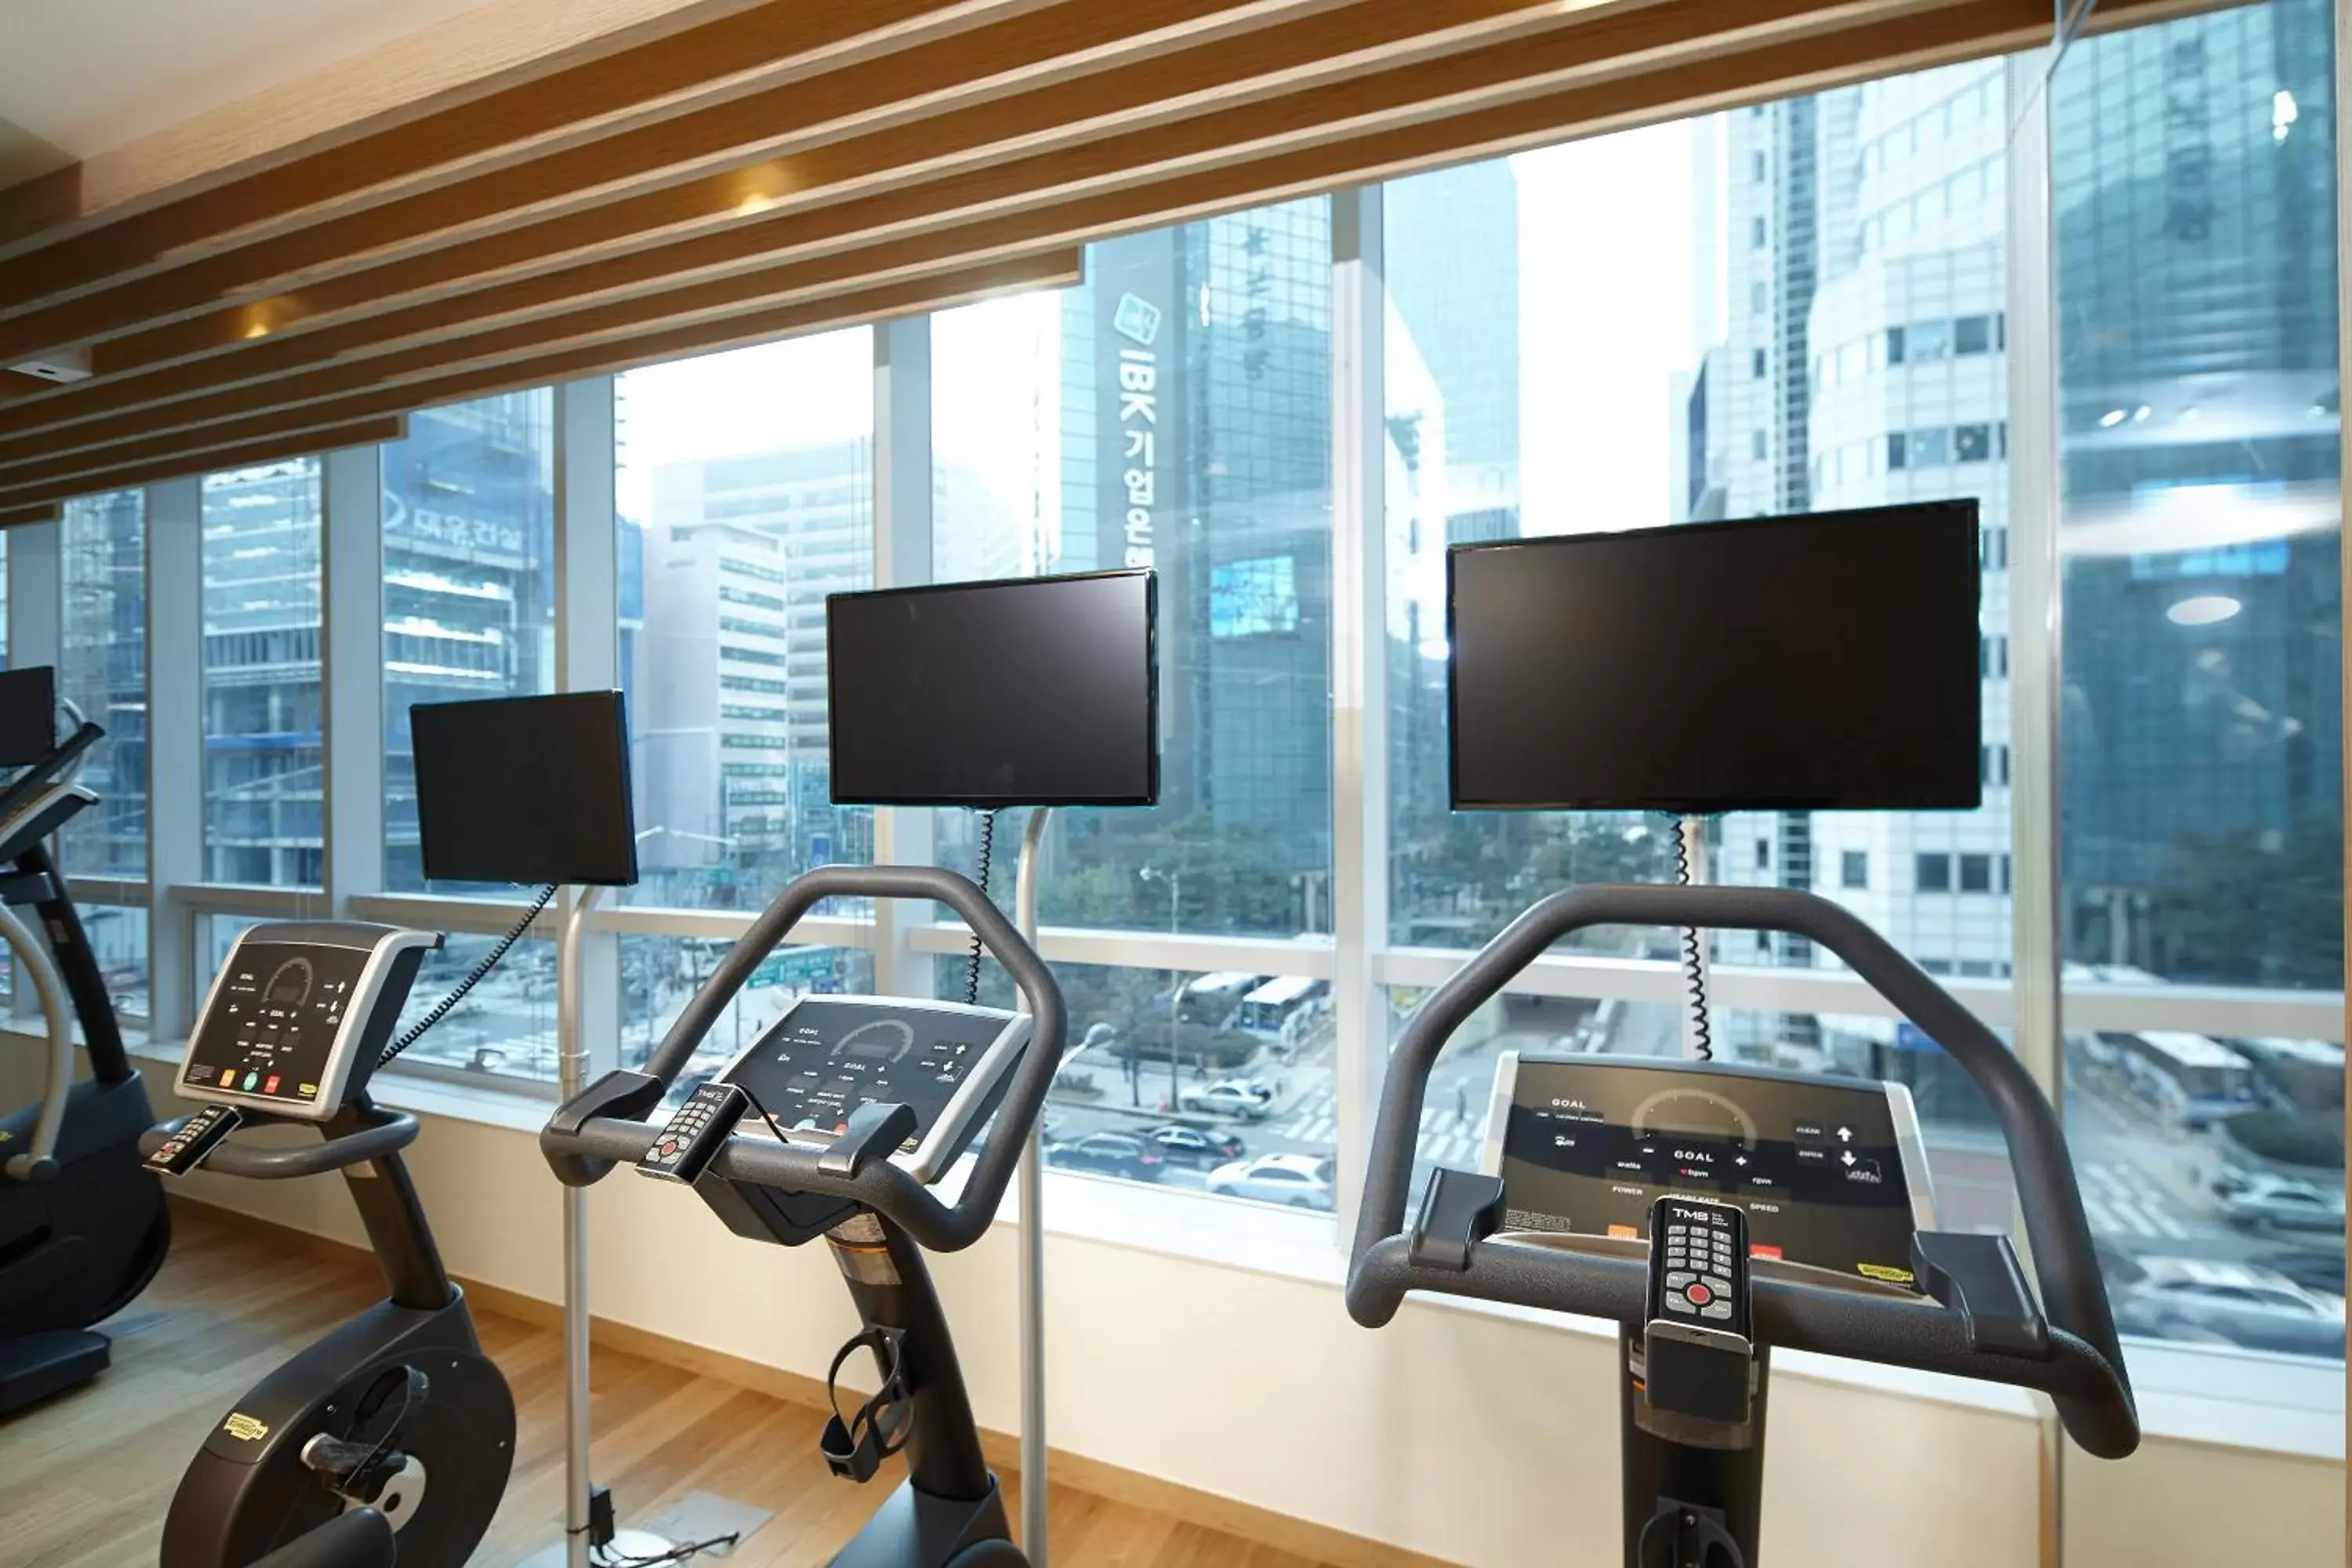 Fitness centre/facilities, Fitness Center/Facilities in LOTTE City Hotel Myeongdong